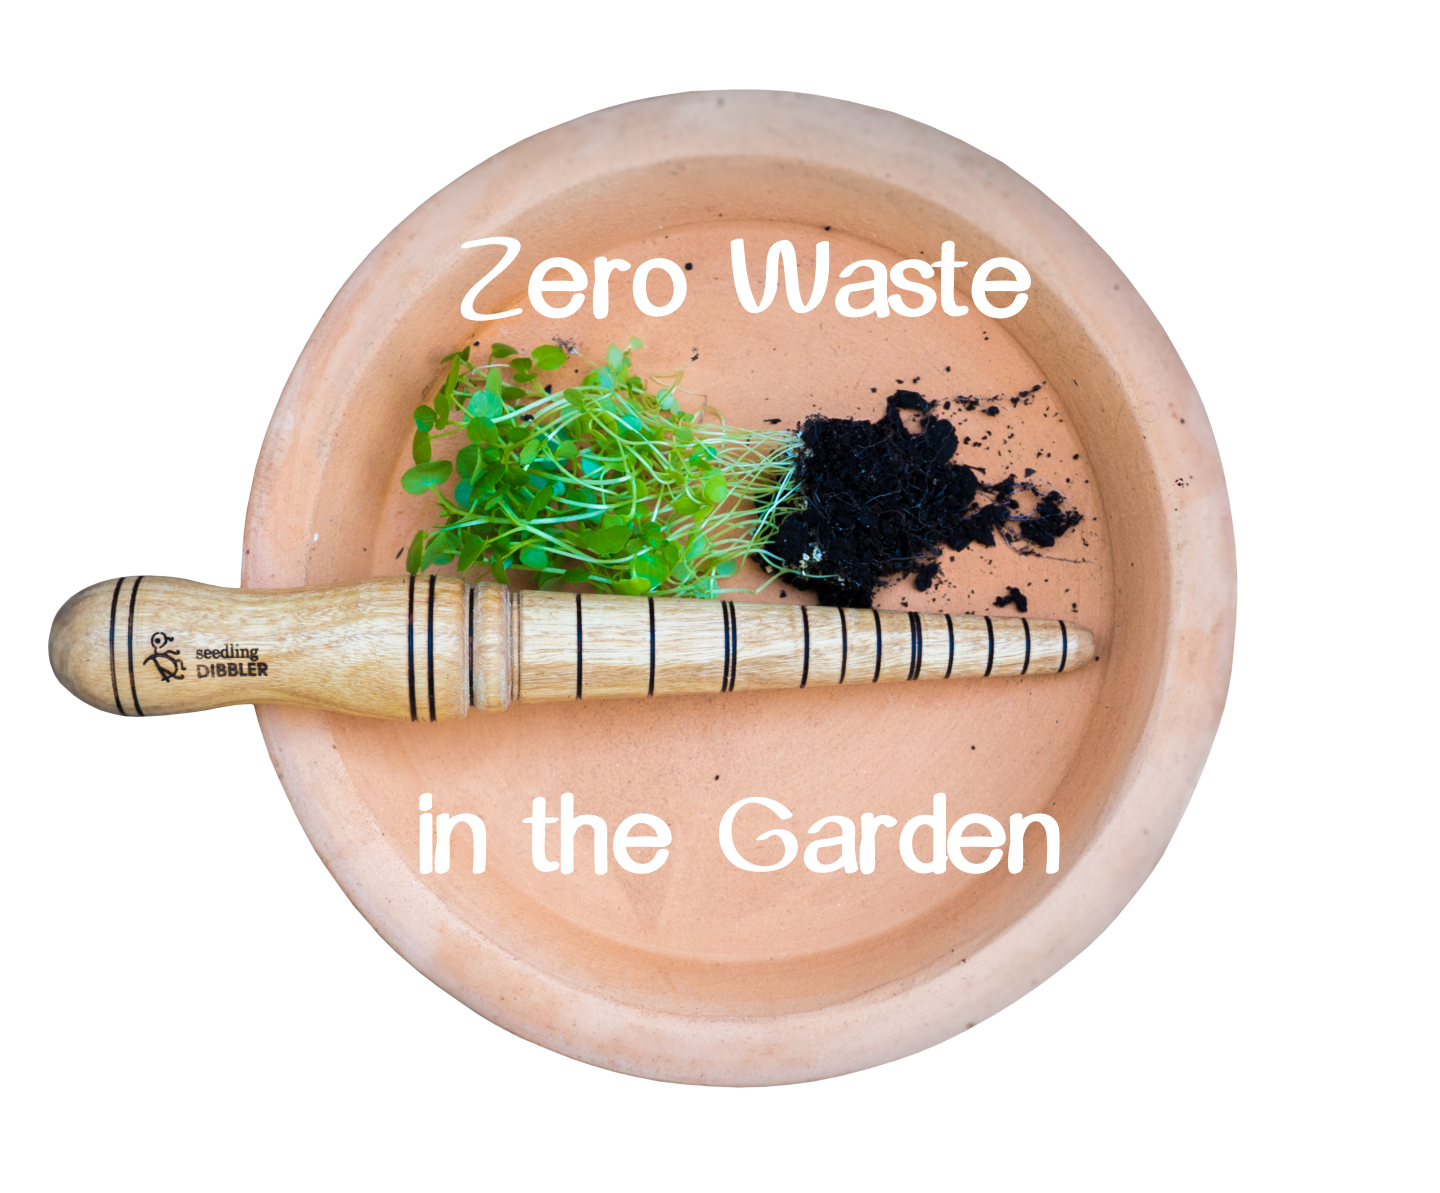 Gardening for the Zero Waster  - Using a Dibbler